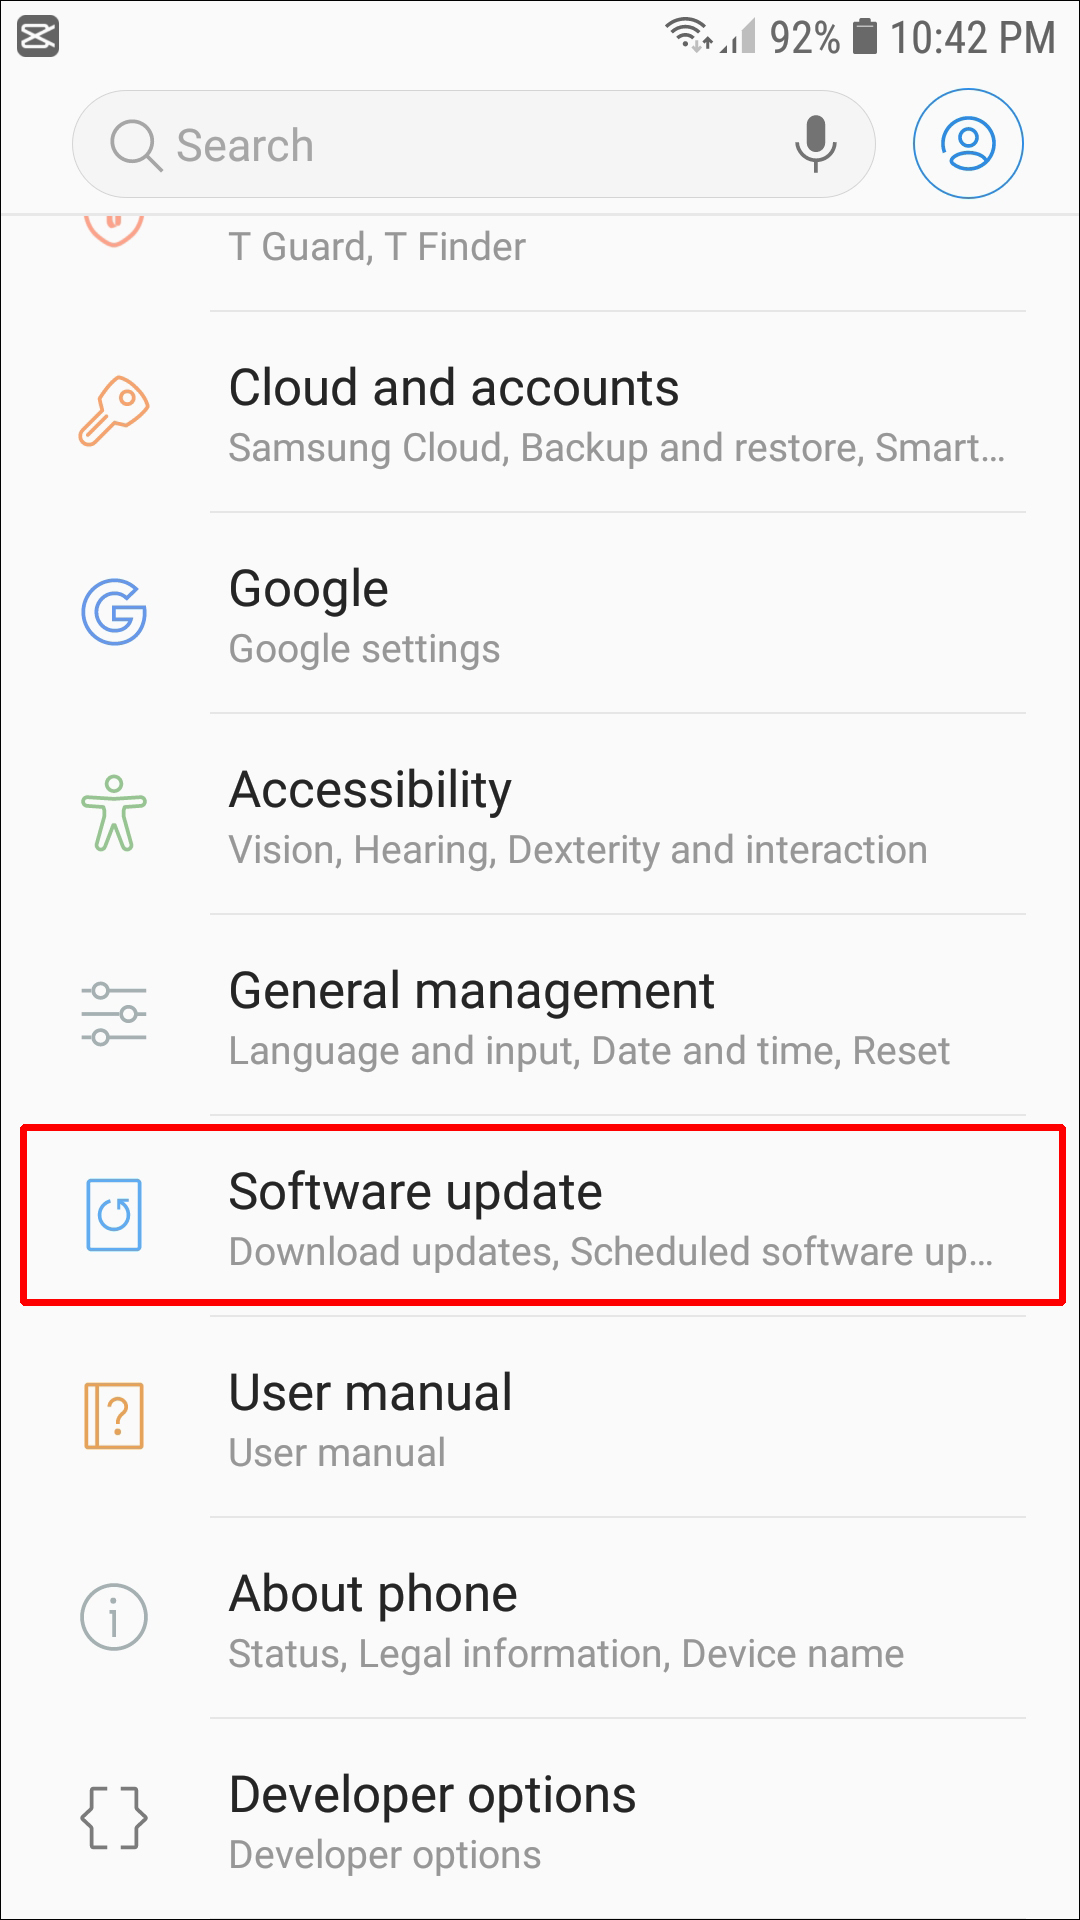 Check if your device is compatible with the latest Android OS version
Manually update your device's Android OS version